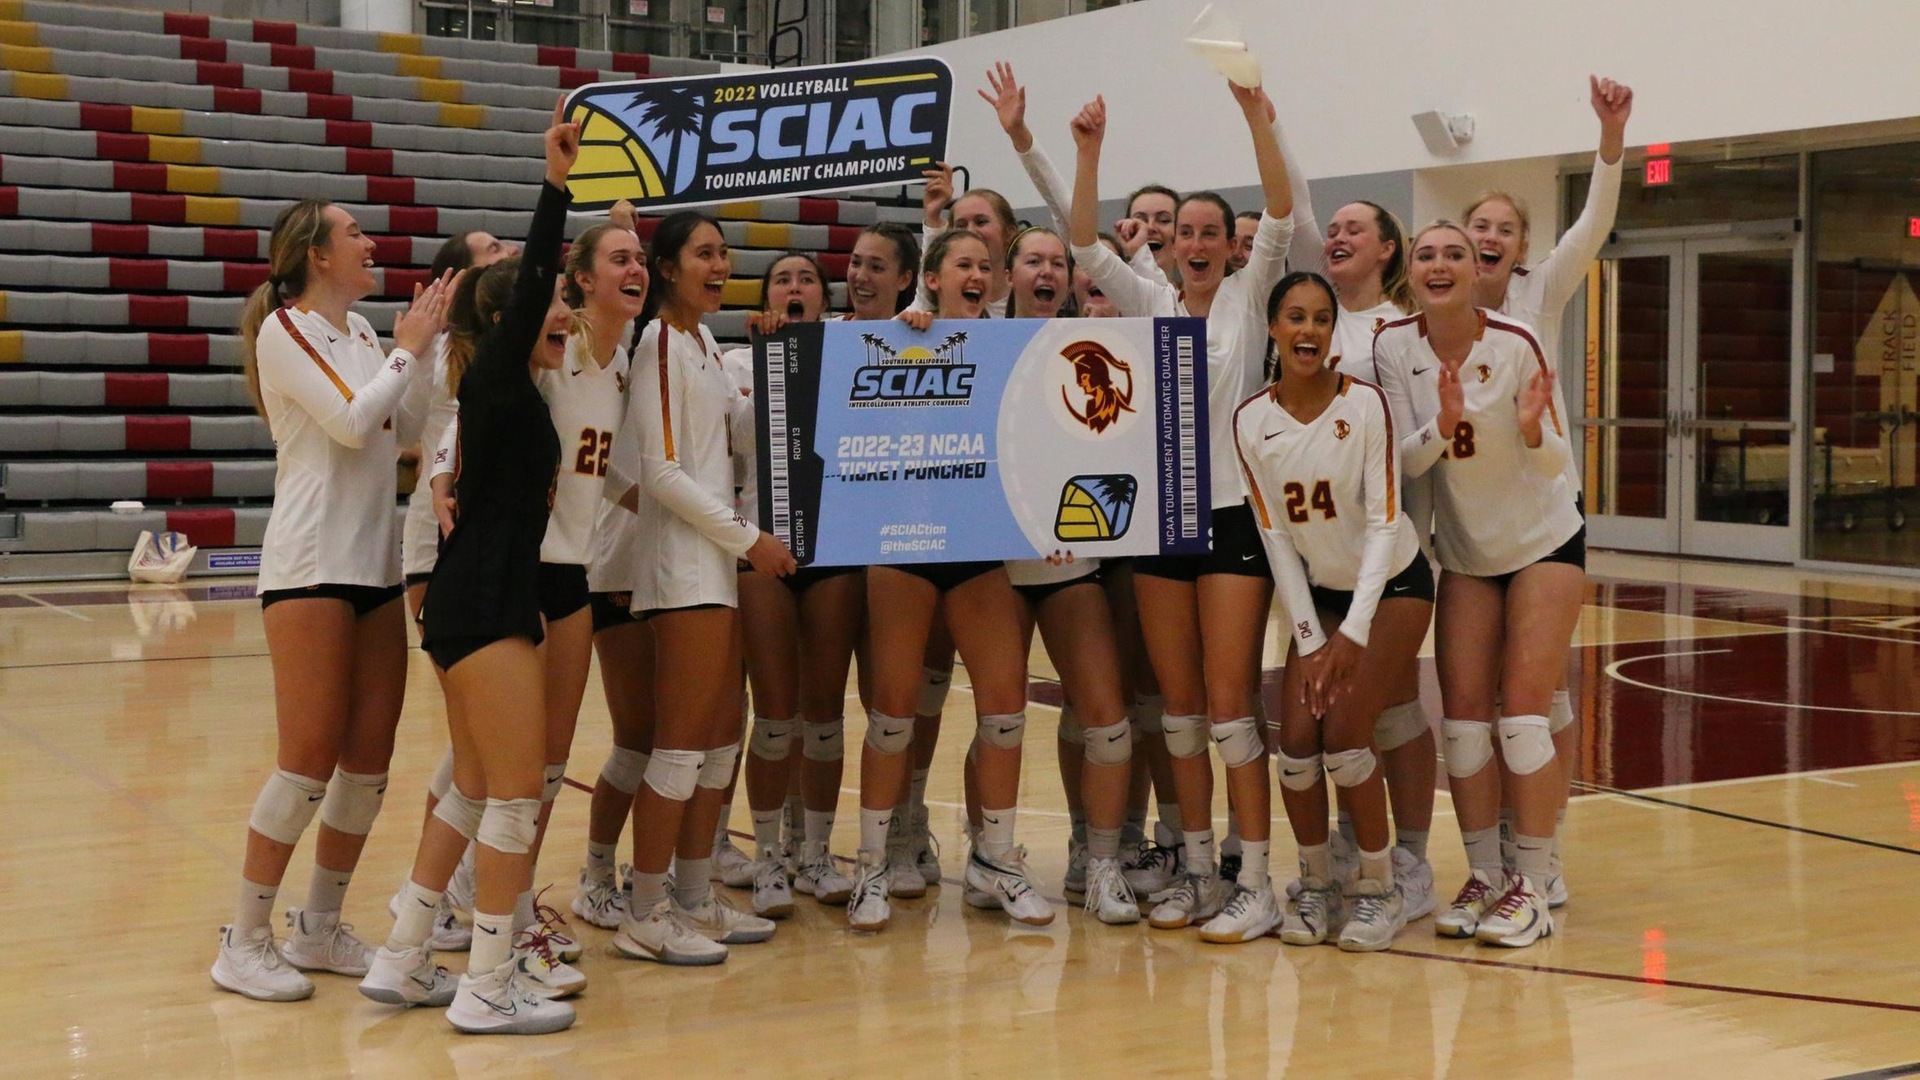 CMS will try to win an NCAA regional title at home, one week after its SCIAC title.